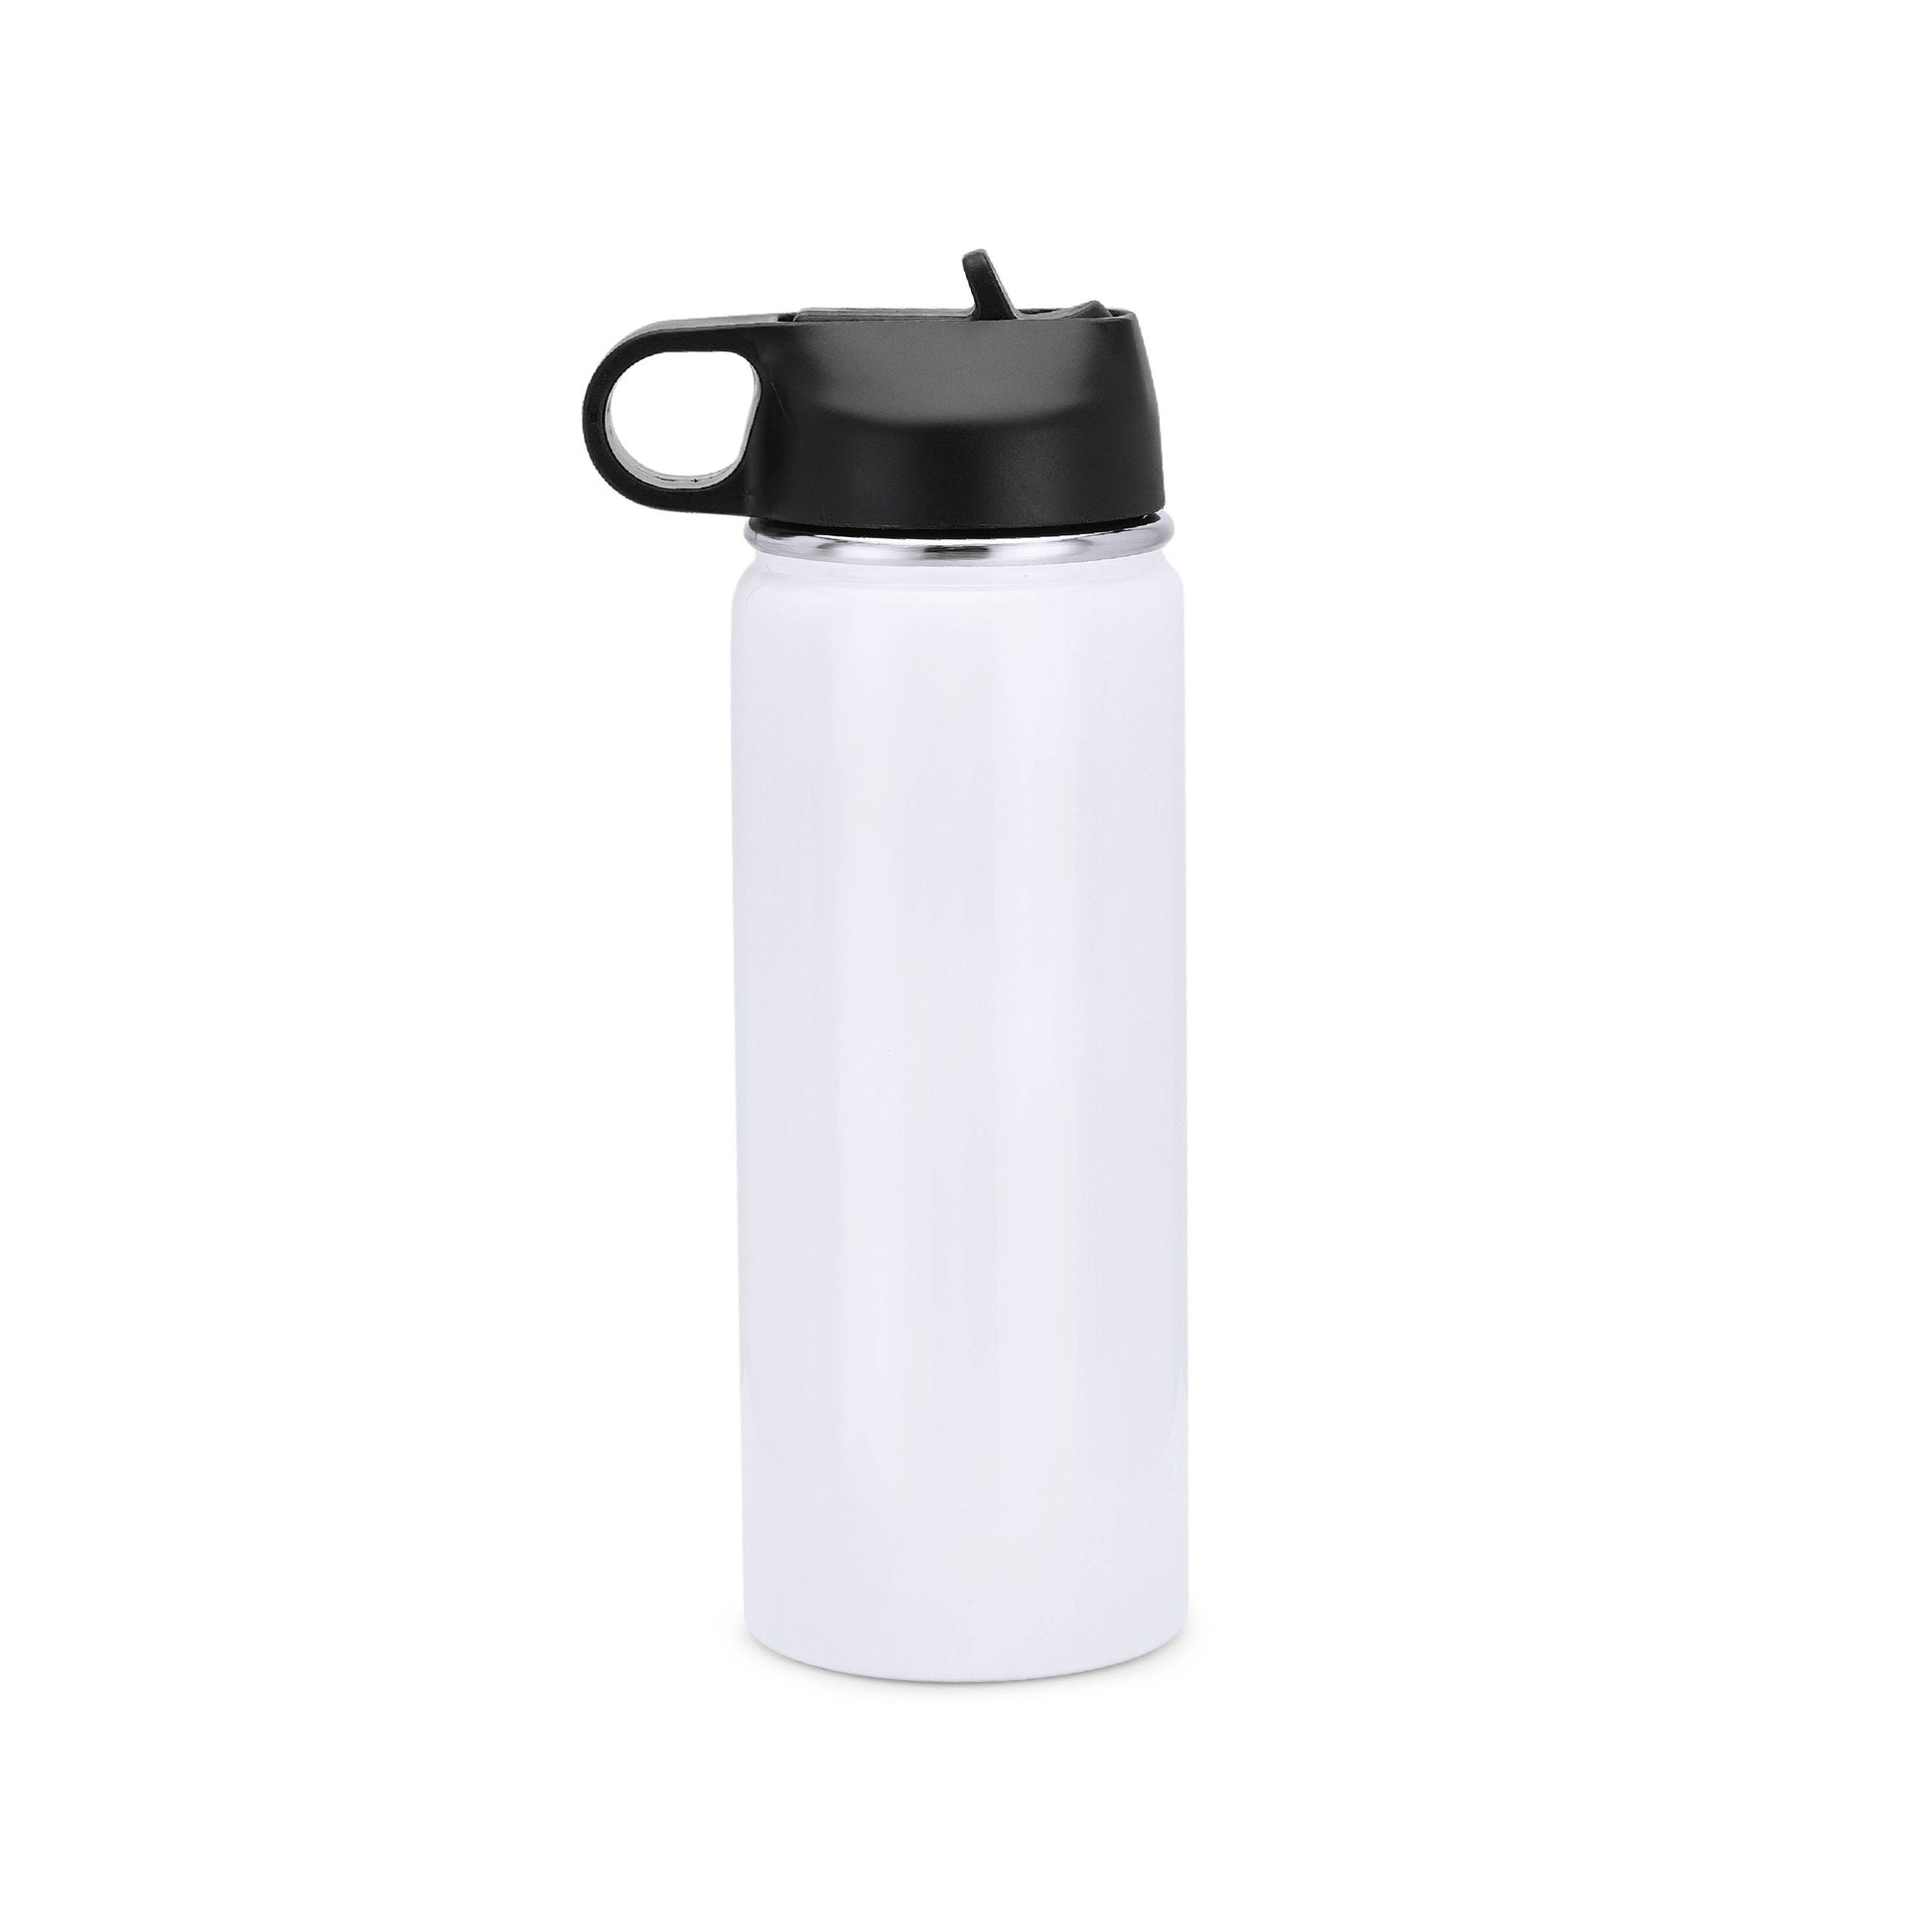 Sublimation Stainless-steel 18, 20 and 32oz Insulated Water